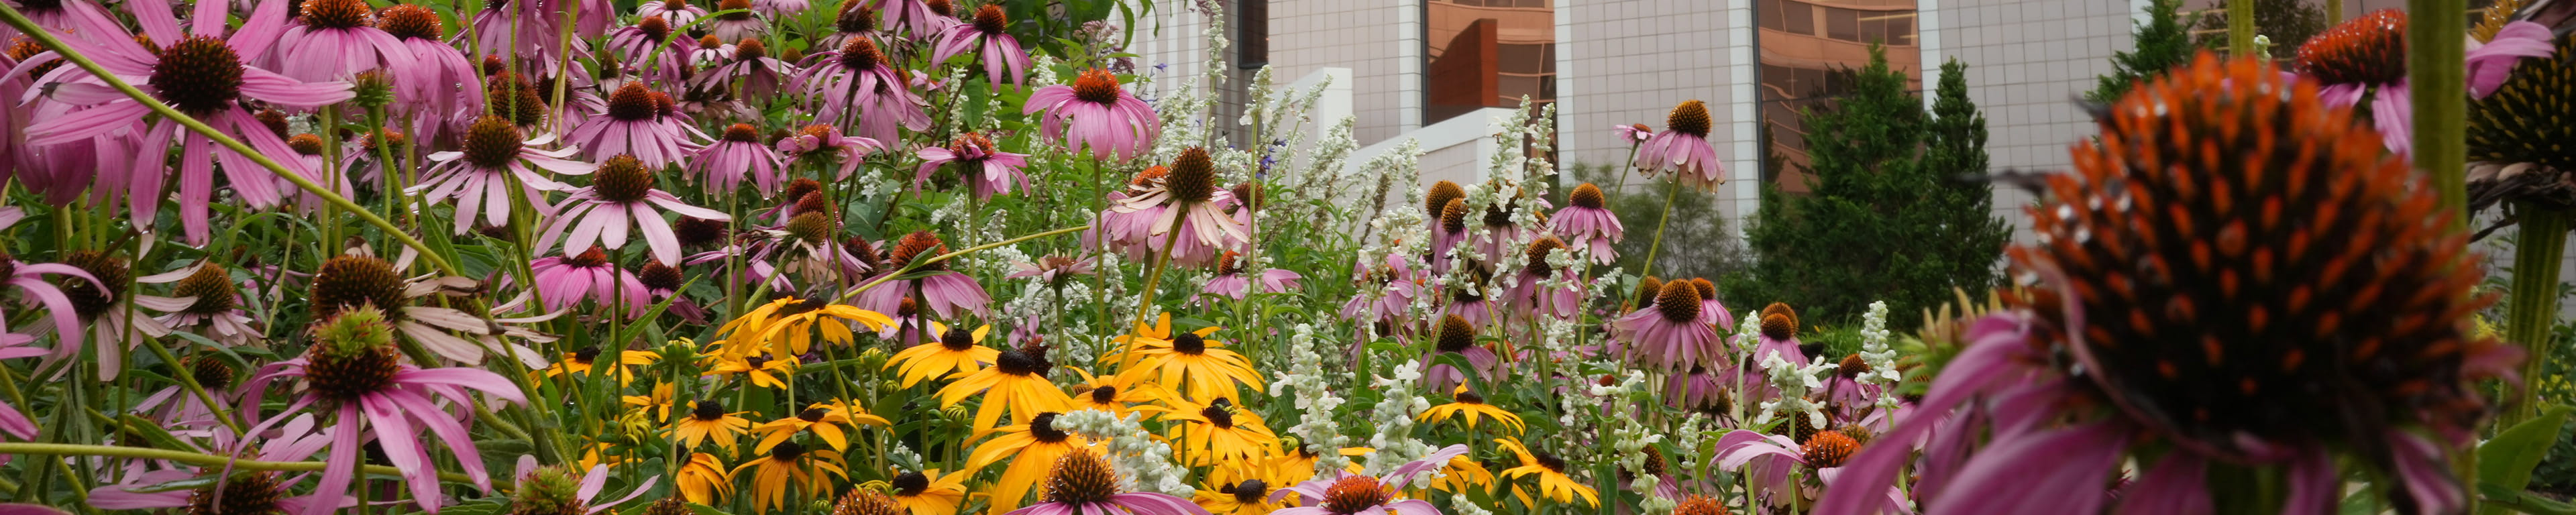 Summer flowers in front of the WMU Library.